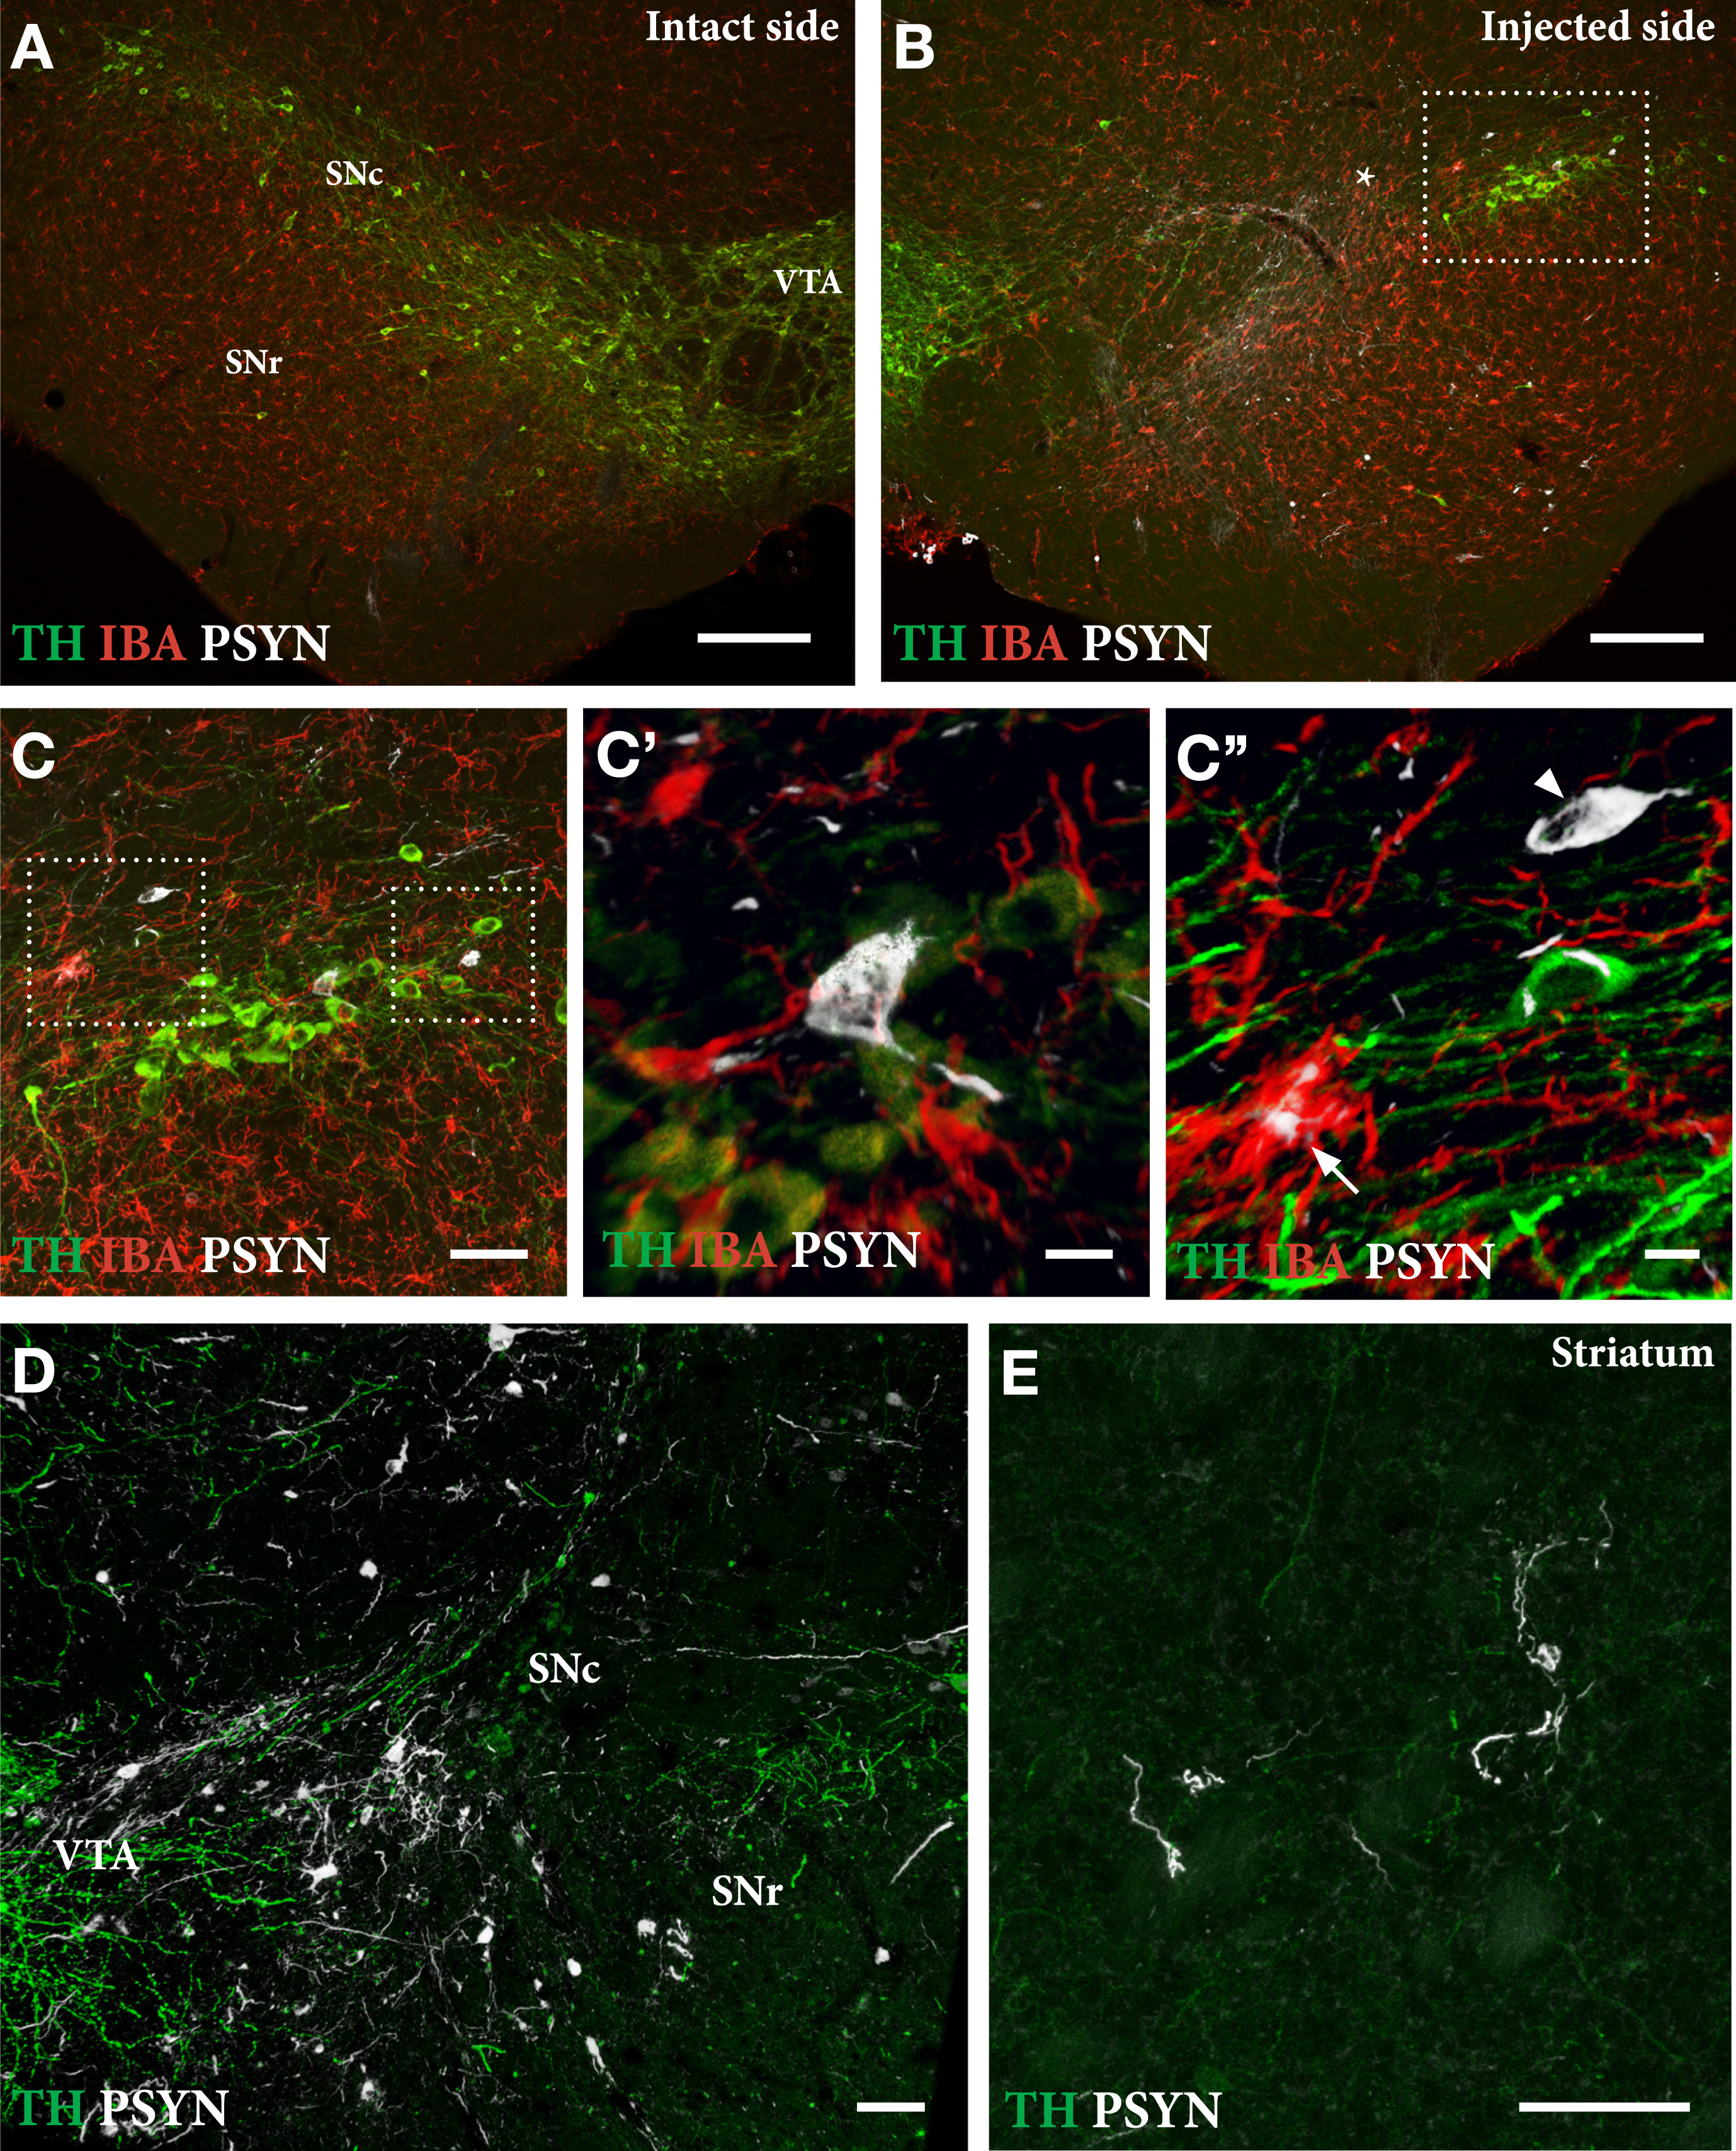 Extent of TH+nigral cell loss (A, B) and p-syn+pathology seen in nigral DA neurons (C, D) and striatal terminals (E) in mice treated with a single intranigral injection of AAV/PFFs. The framed square in B is shown at higher magnification in C, and the squares in C are shown at higher magnification in C' and C''. At this stage, 12 weeks post-injection, the ongoing p-syn pathology and microglial response is similar in magnitude and appearance to that seen in long-term AAV/PFF treated rats (see Fig. 4). As in rats, TH downregulation (arrowhead in C'') and p-syn+inclusions inside activated Iba1 + microglia (arrow in C'') occur also in the mouse SynFib model. Scale bars: 200μm (A,B), 50μm (C,D,E), 10μm (C',C''). Unpublished data.